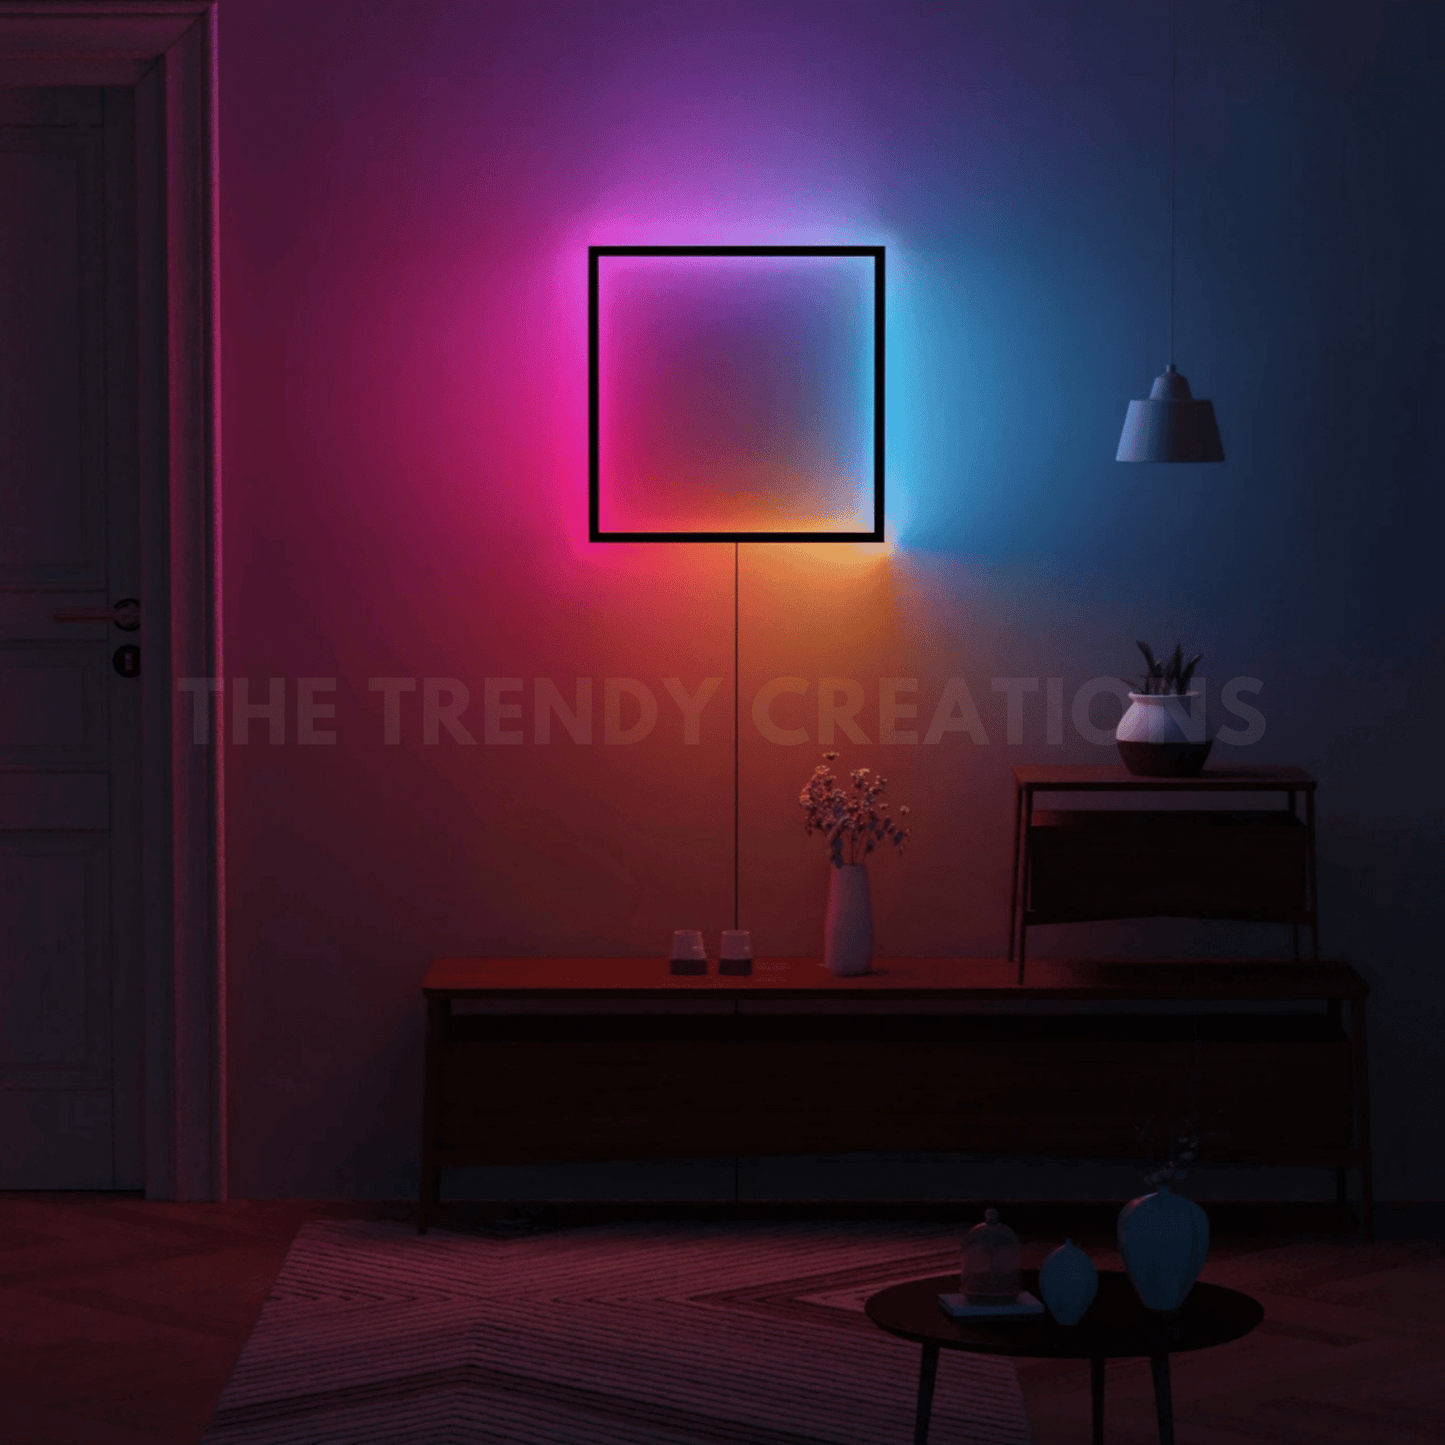 Multicolour Cube Wall Lamp By The Trendy Creations , Now Available In Pakistan | Nordic Design